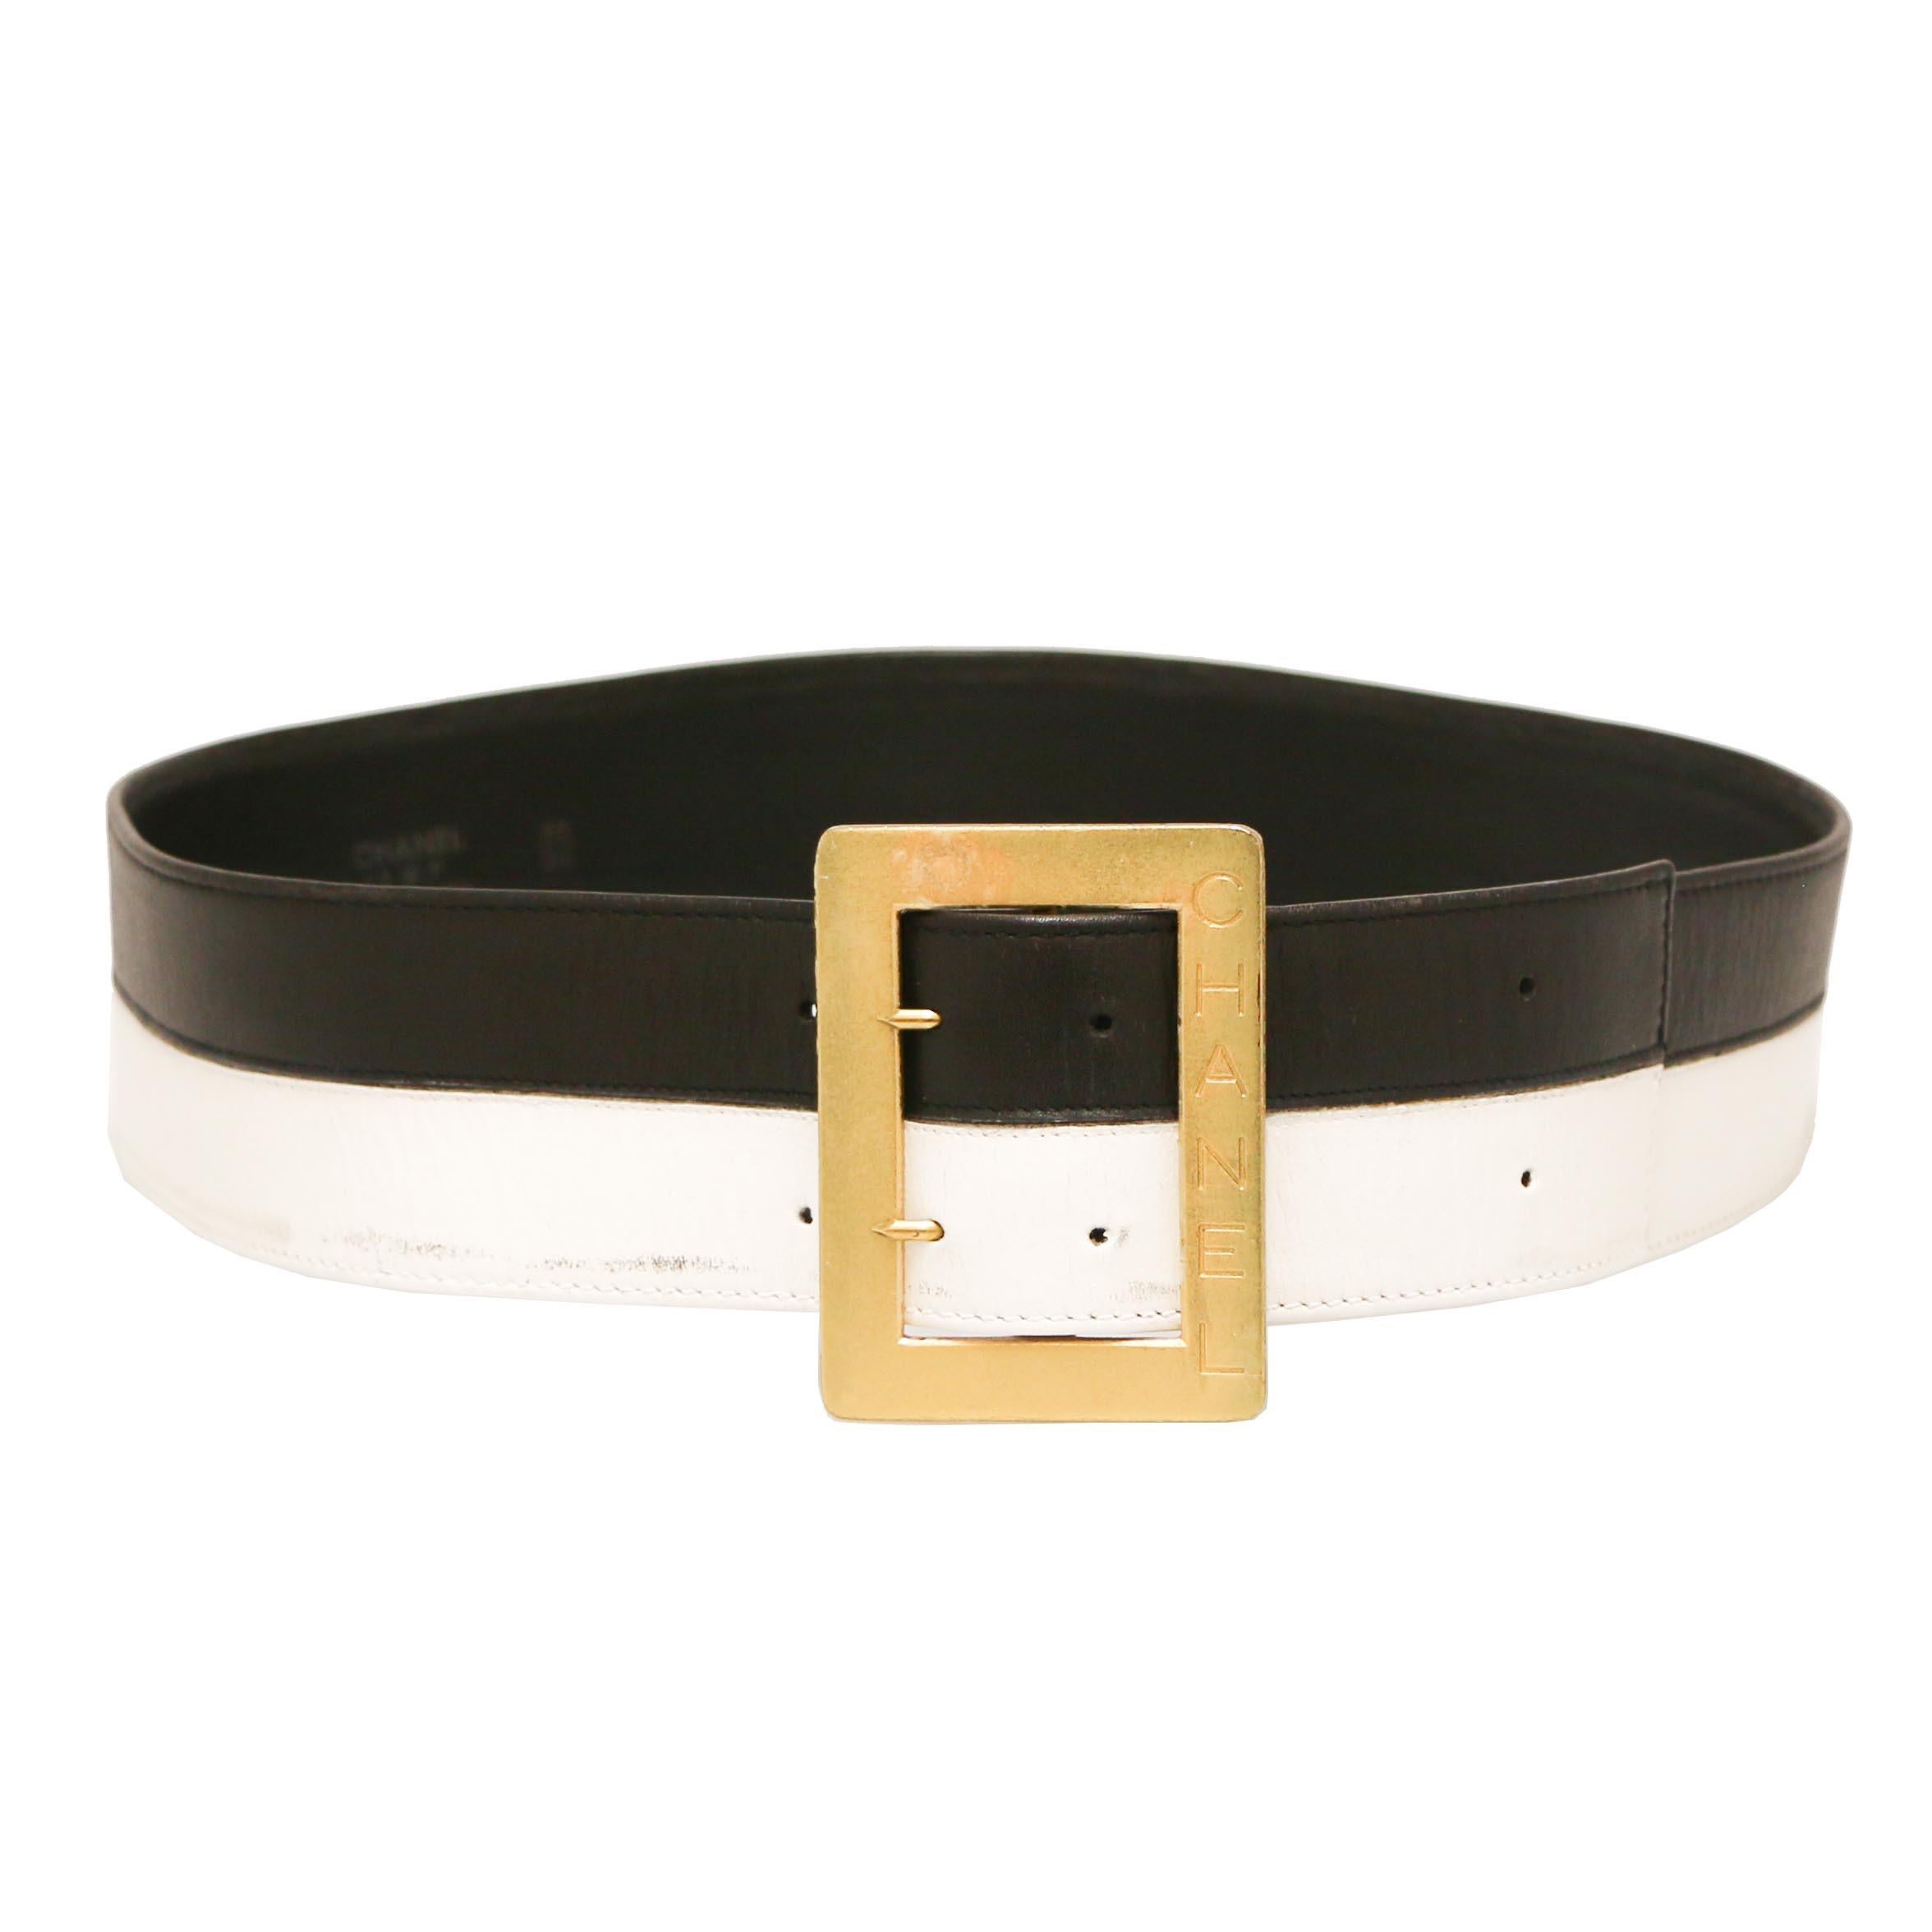 CHANEL Spring/Summer 1995 Belt in bicolor black and white leather. The hardware is in golden metal.
Traces on the white leather. CHANEL engraved buckle.
In very good condition.
Made in France.
Size: 80 x 5cm
Middle hole: 70 cm
Year: Spring